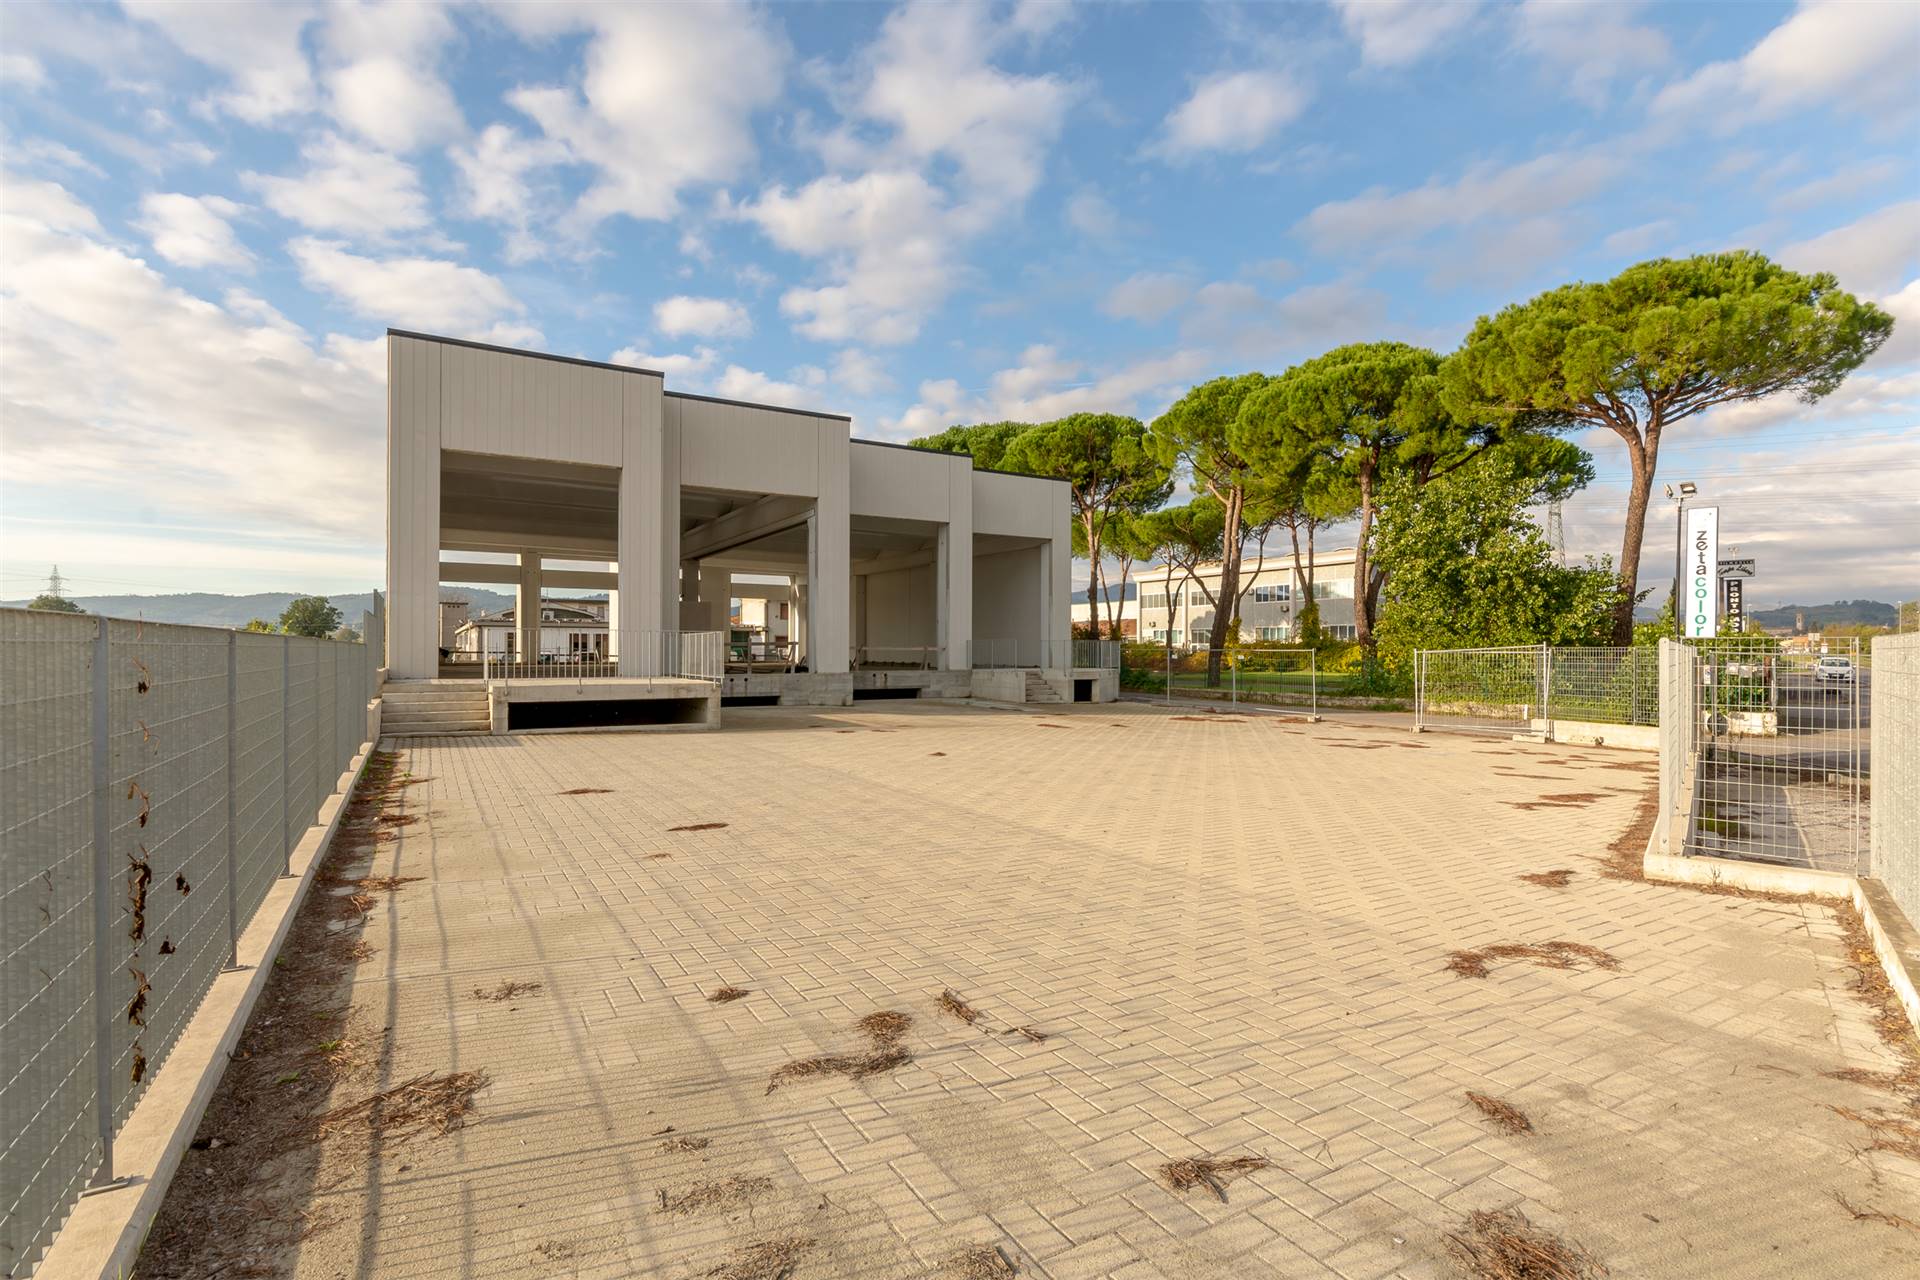 SANT'ANGELO A LECORE, CAMPI BISENZIO, Industrial warehouse for rent of 85 Sq. mt., New construction, Heating Individual heating system, Energetic 